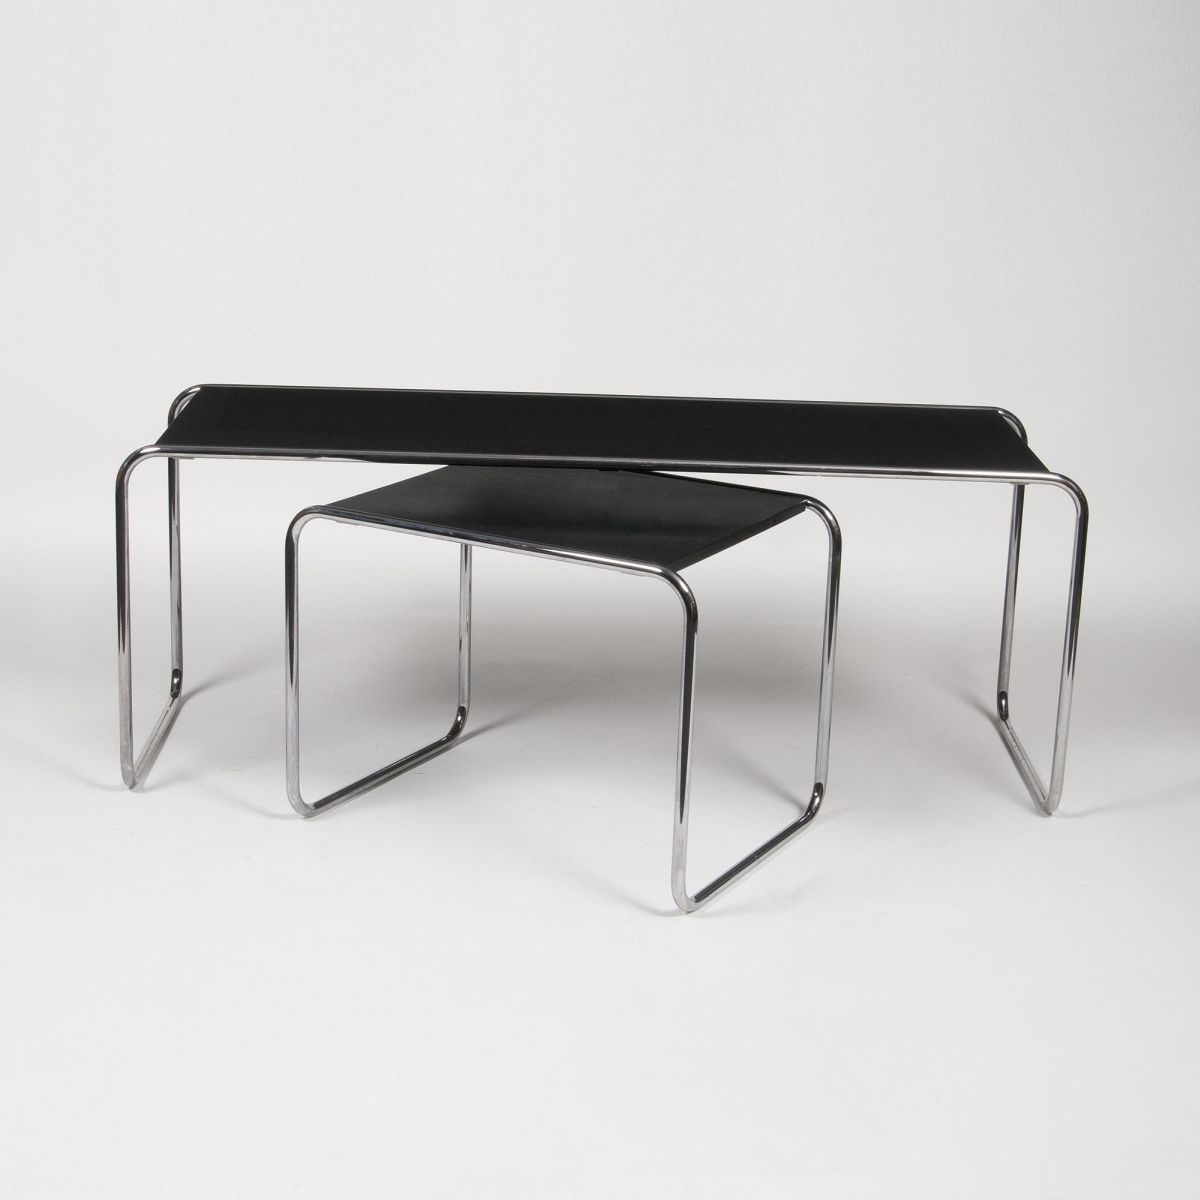 A Set of 2 Sidetables 'B9' and B10' for Thonet